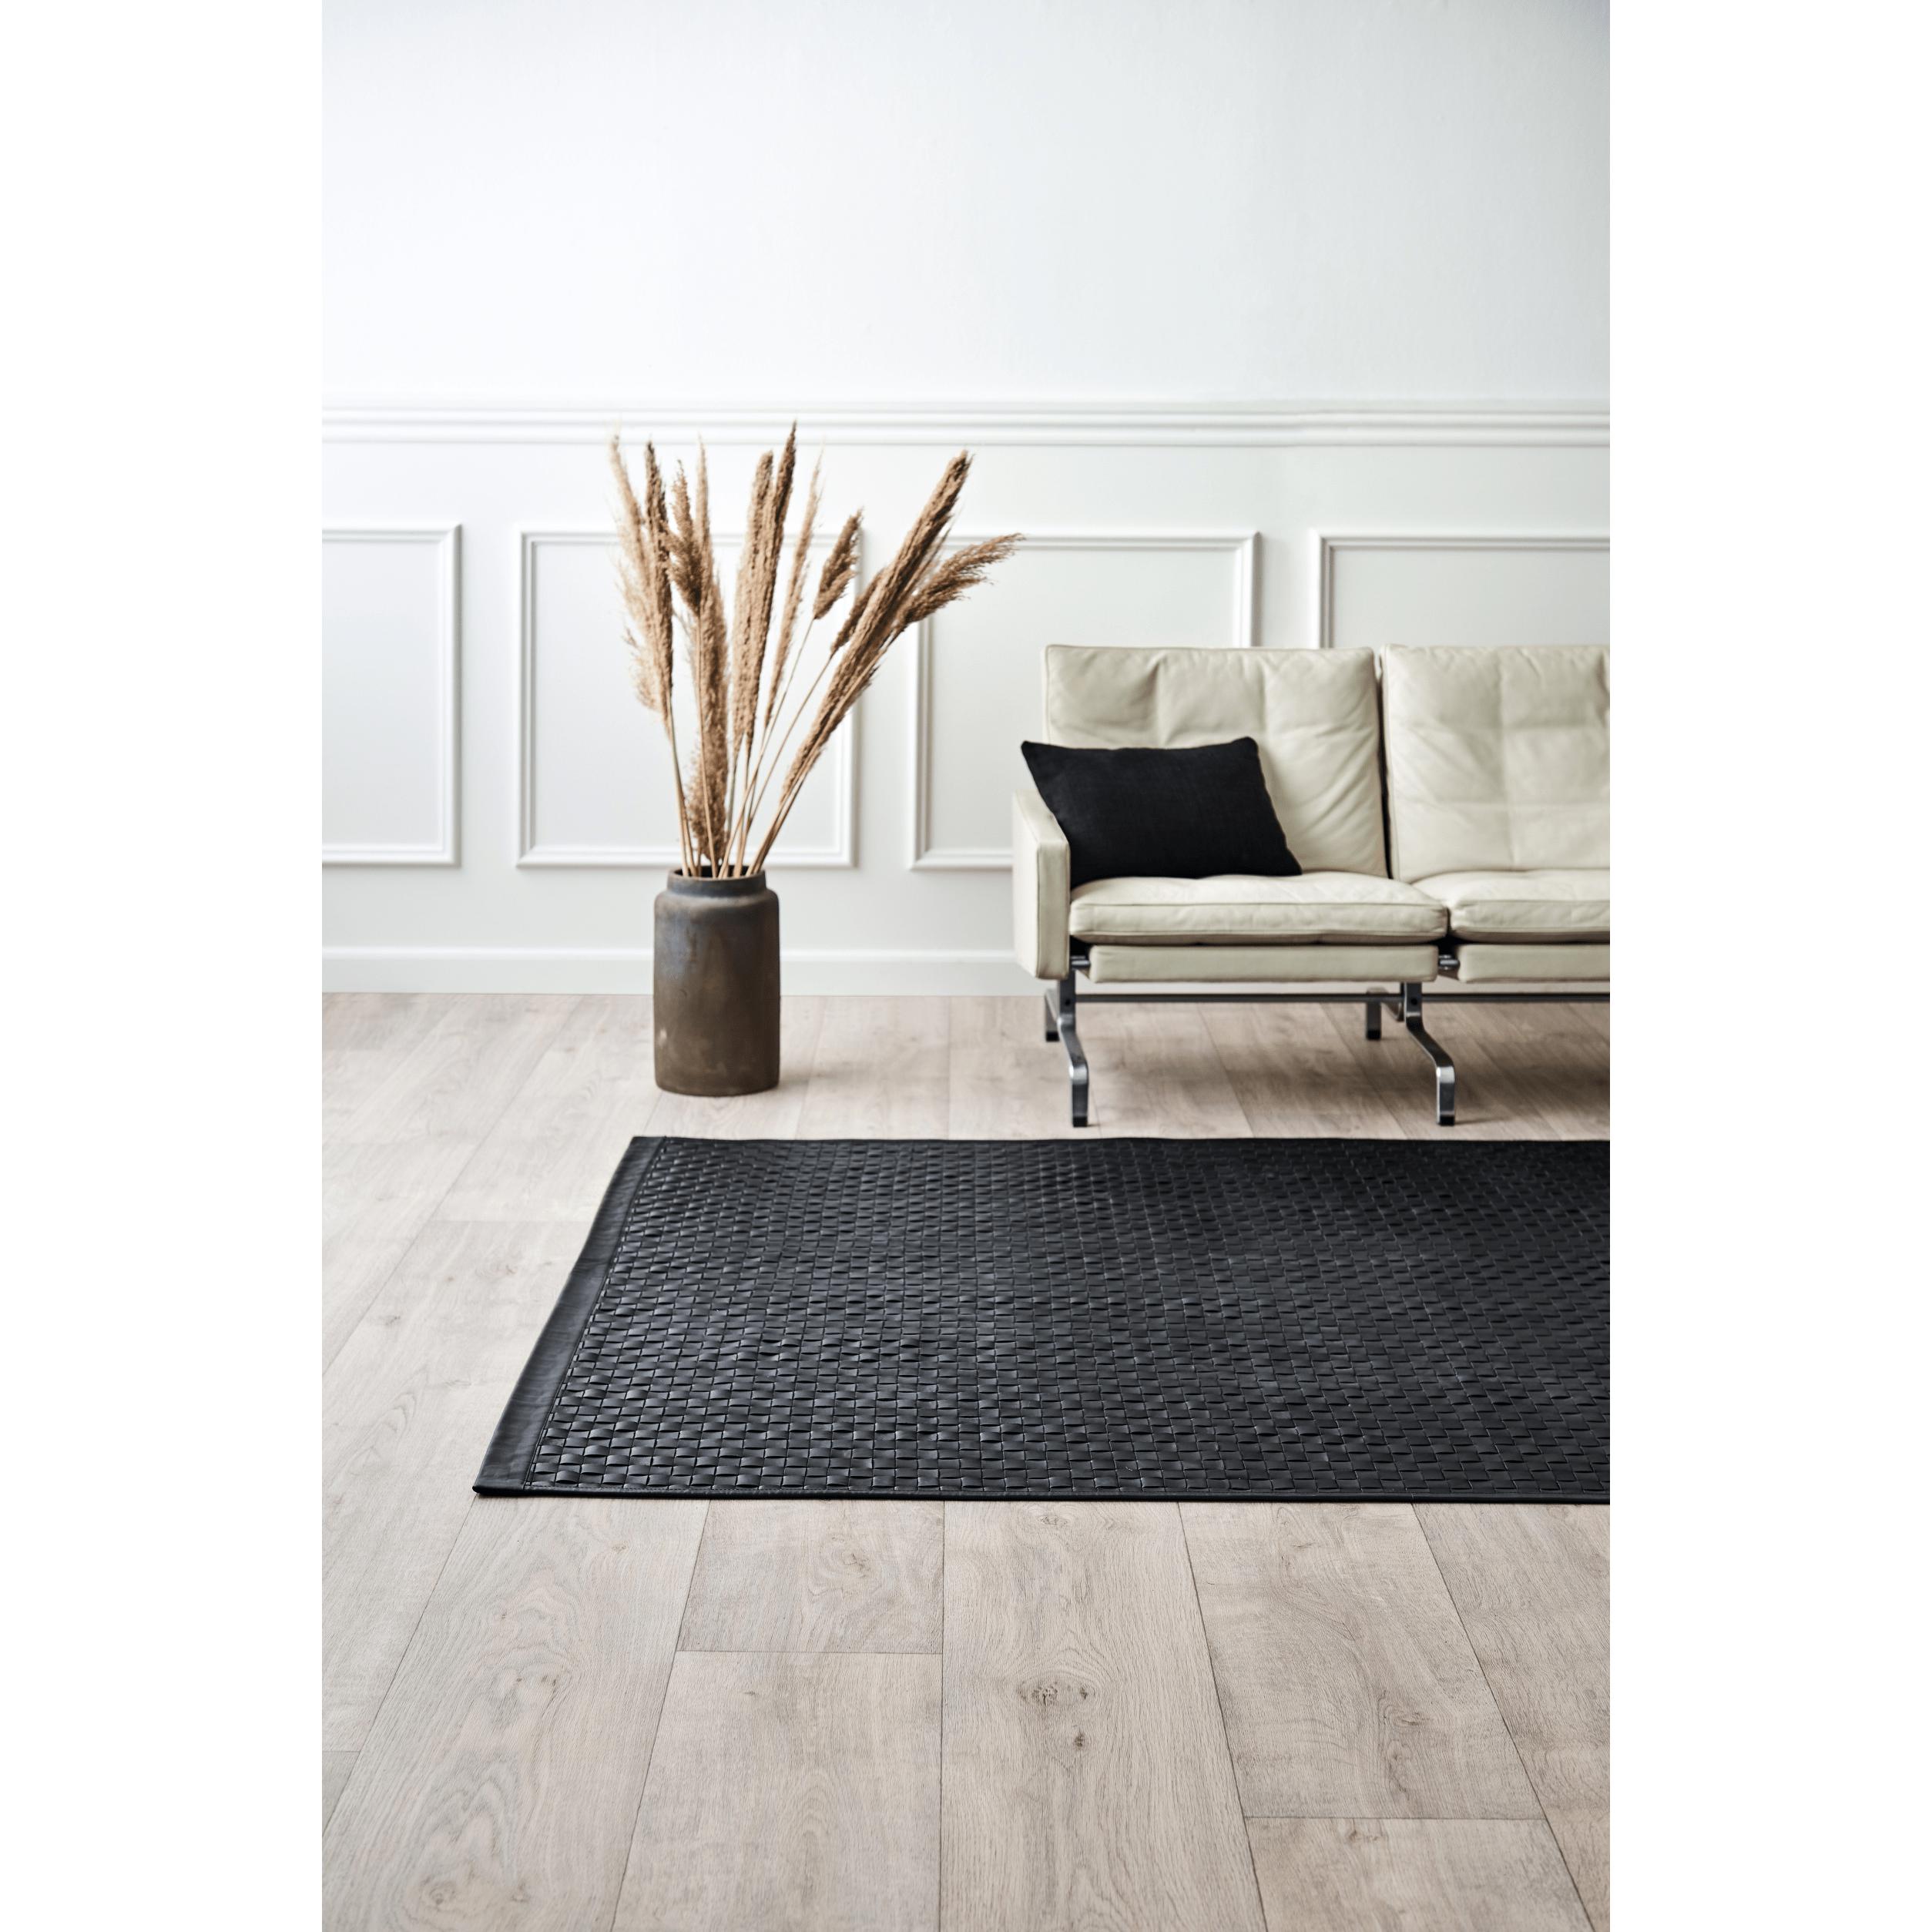 Rug Solid Toscany Raping Black, 65 x 135 cm